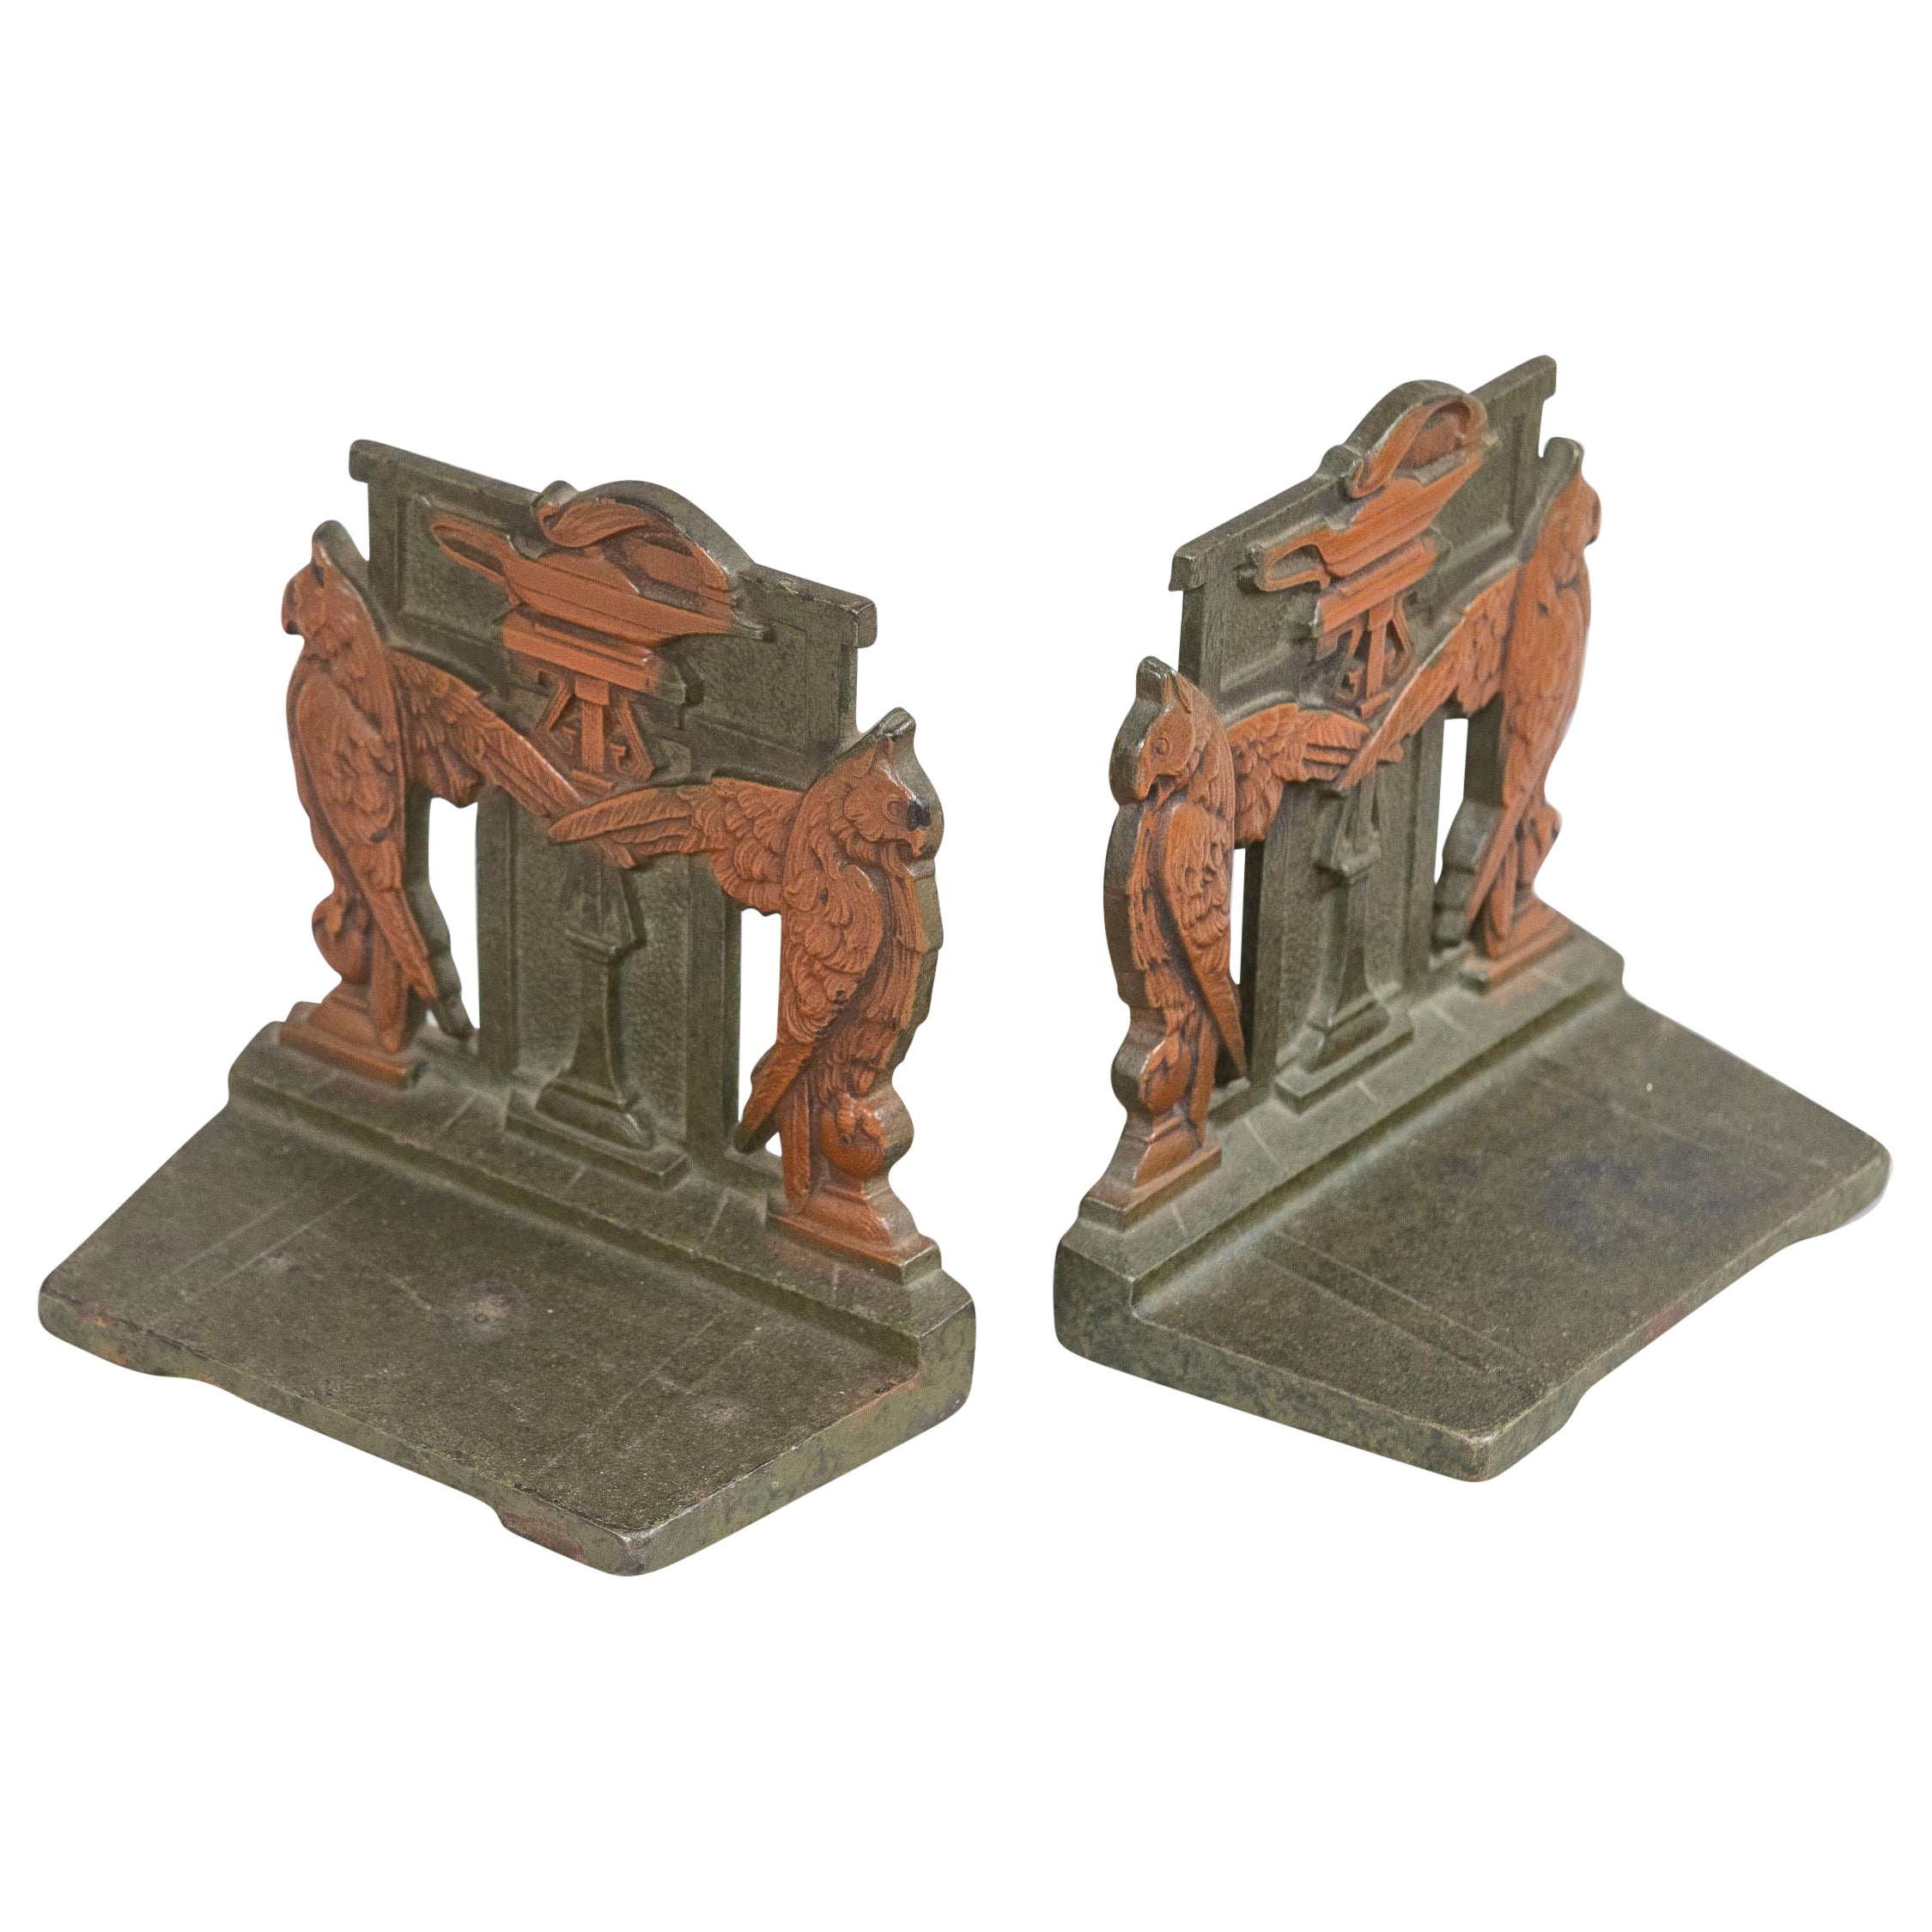 Pair of Art Deco Bookends w/Owls Surrounding a Flame, ca. 1920's, Judd Co.